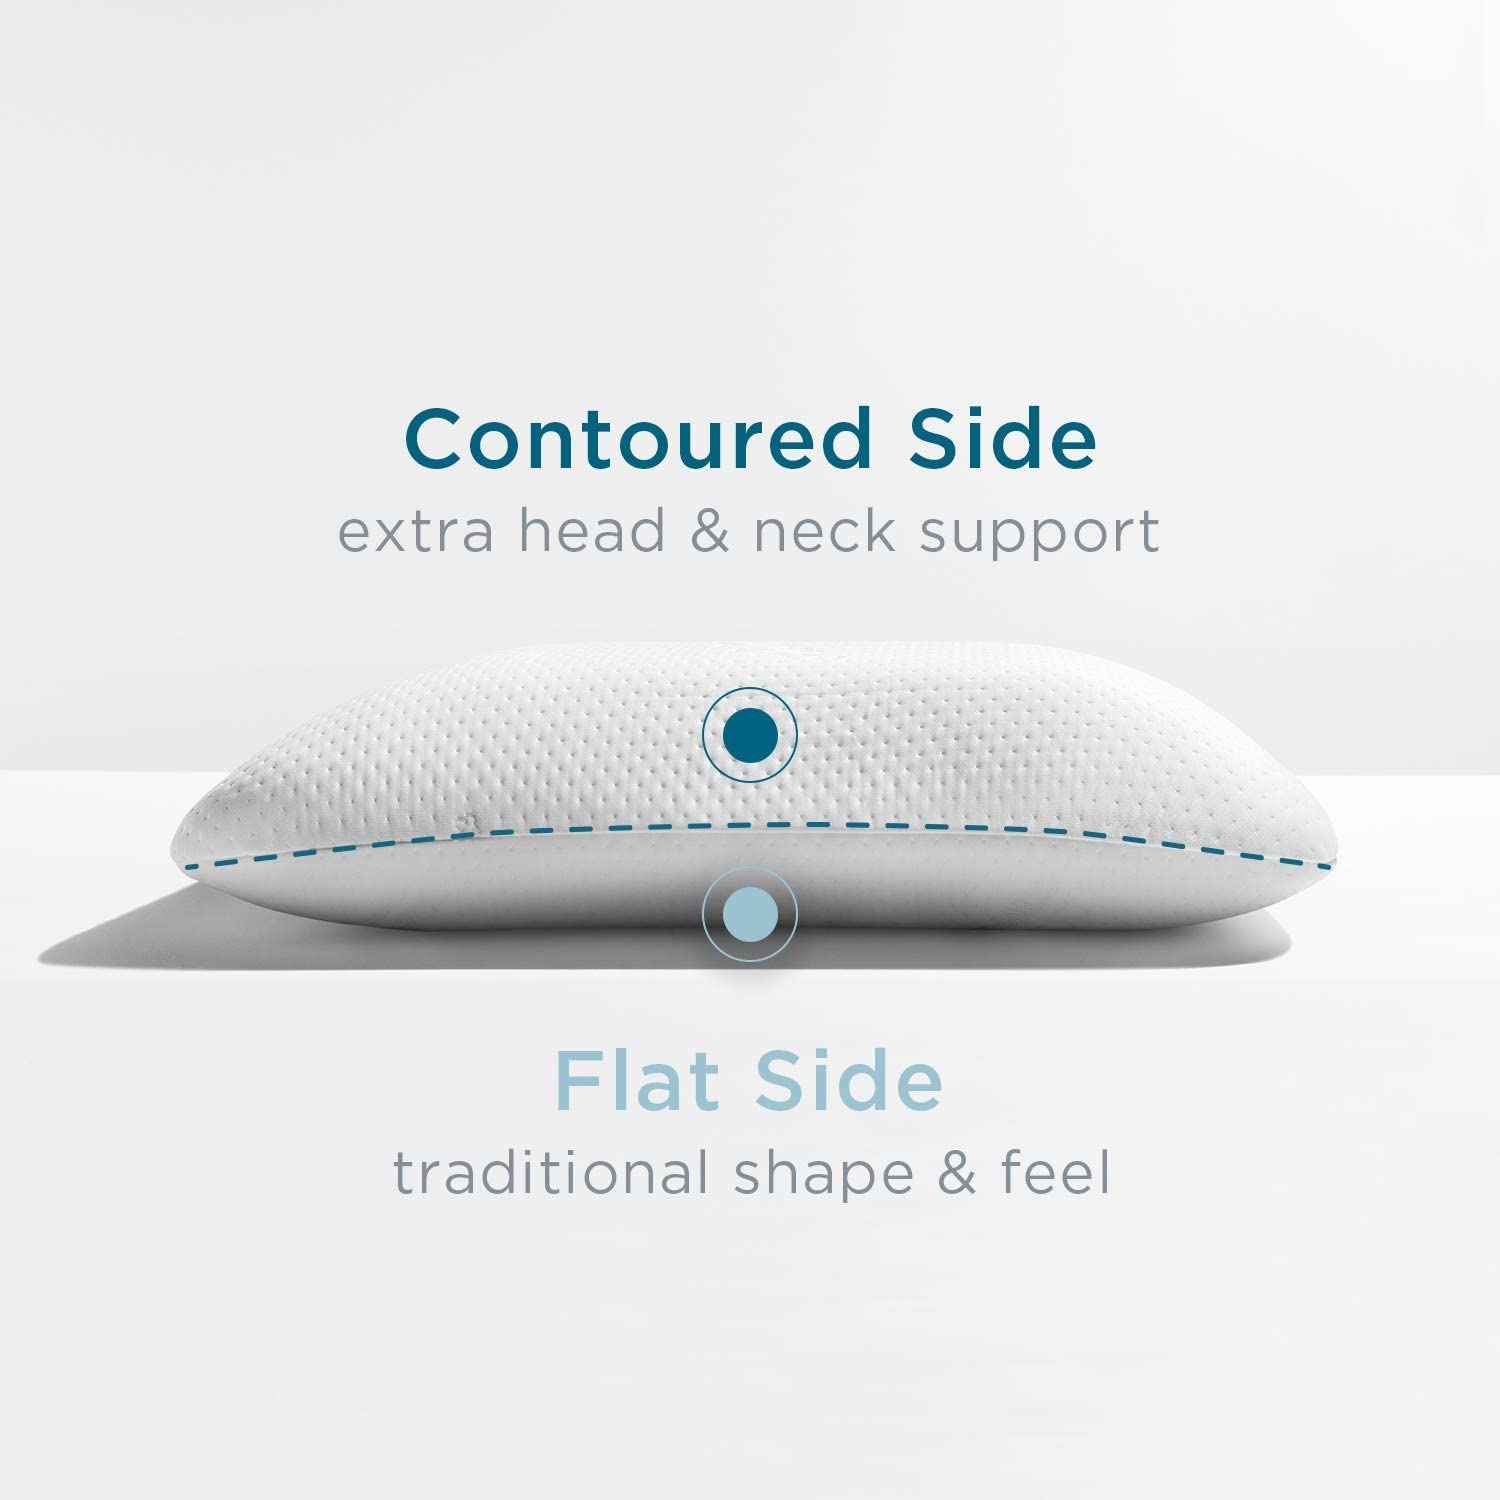 The adapt symphony is an all-round pillow. Good for back sleepers.